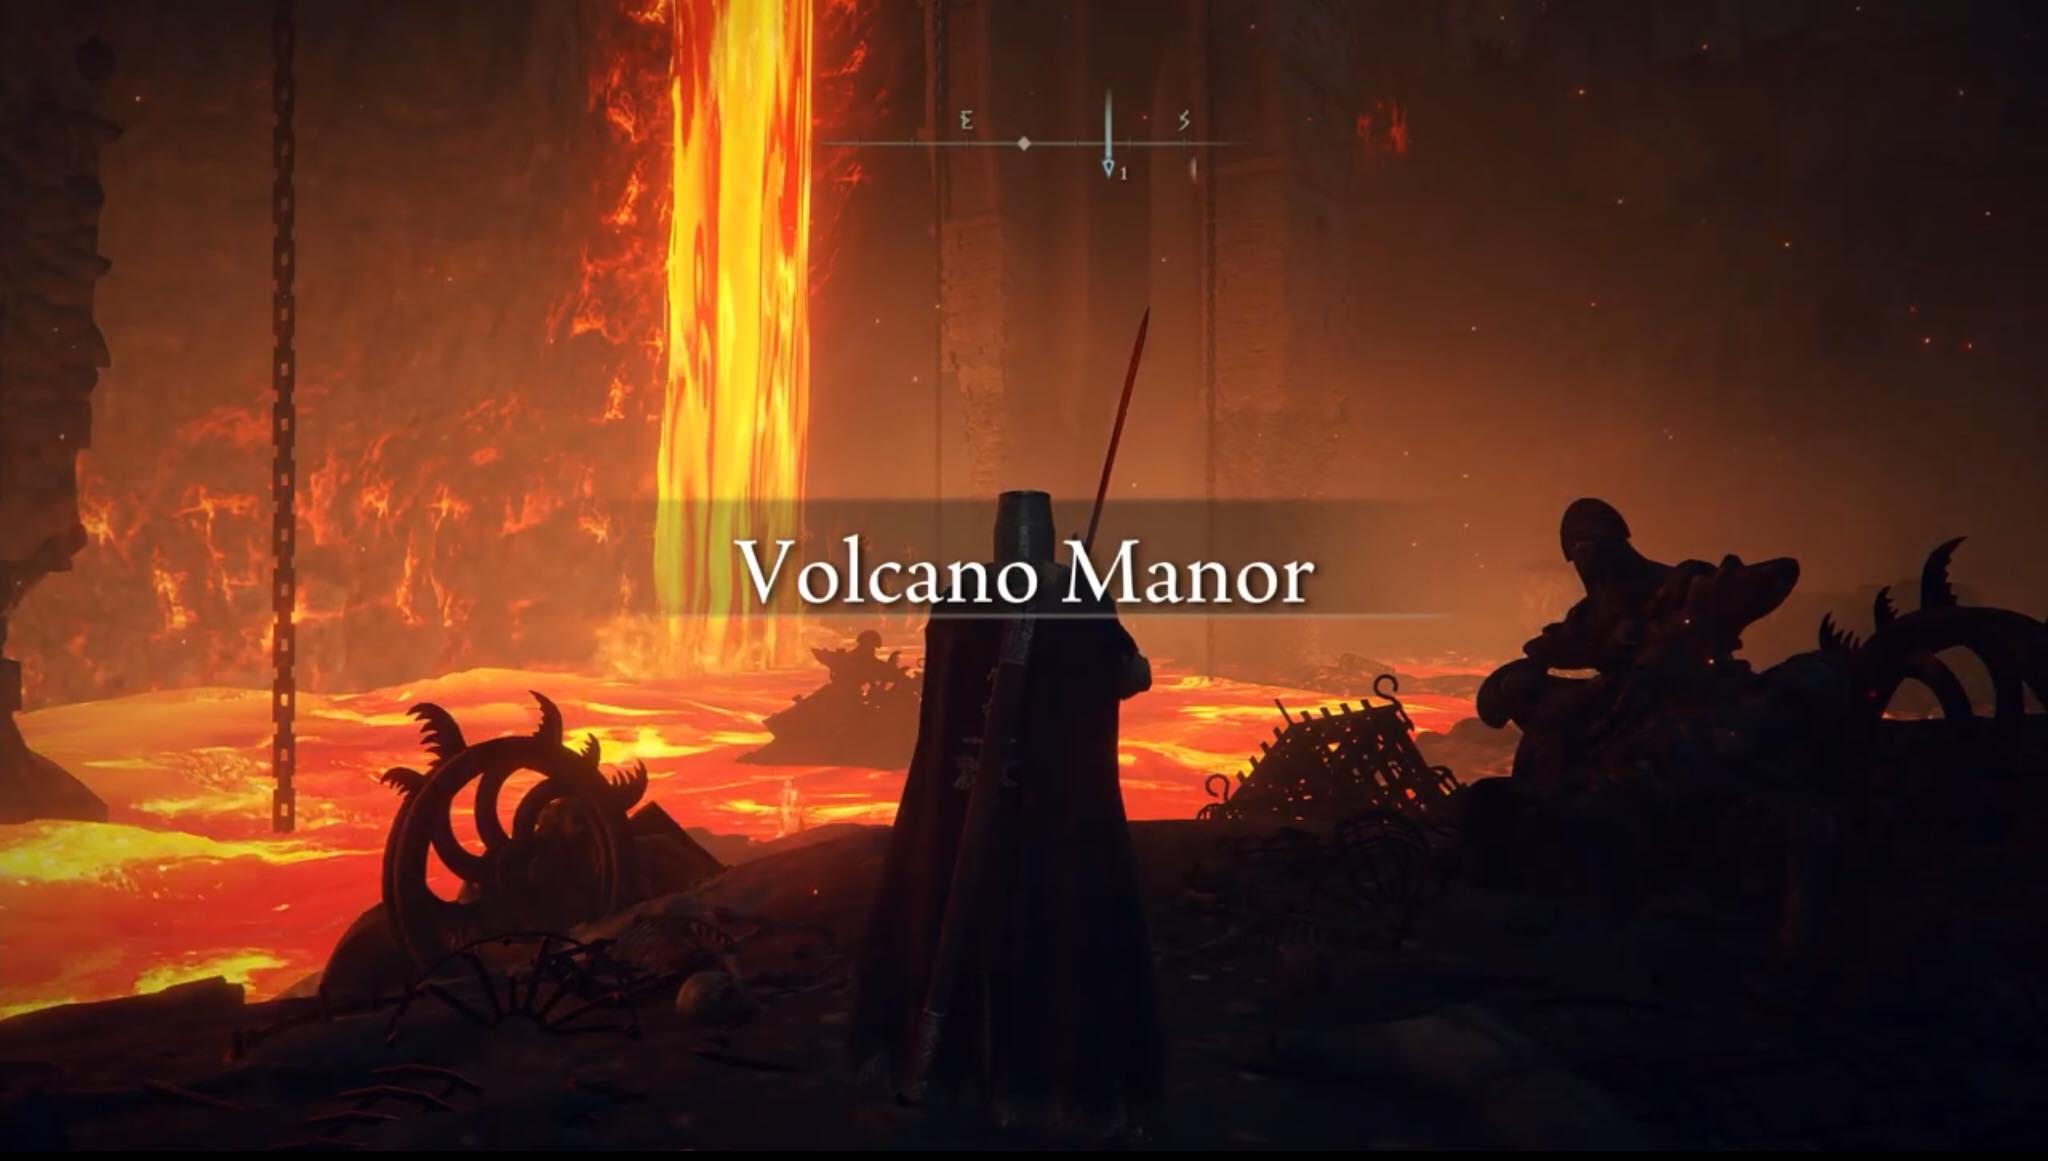 The notorious Volcano Manor